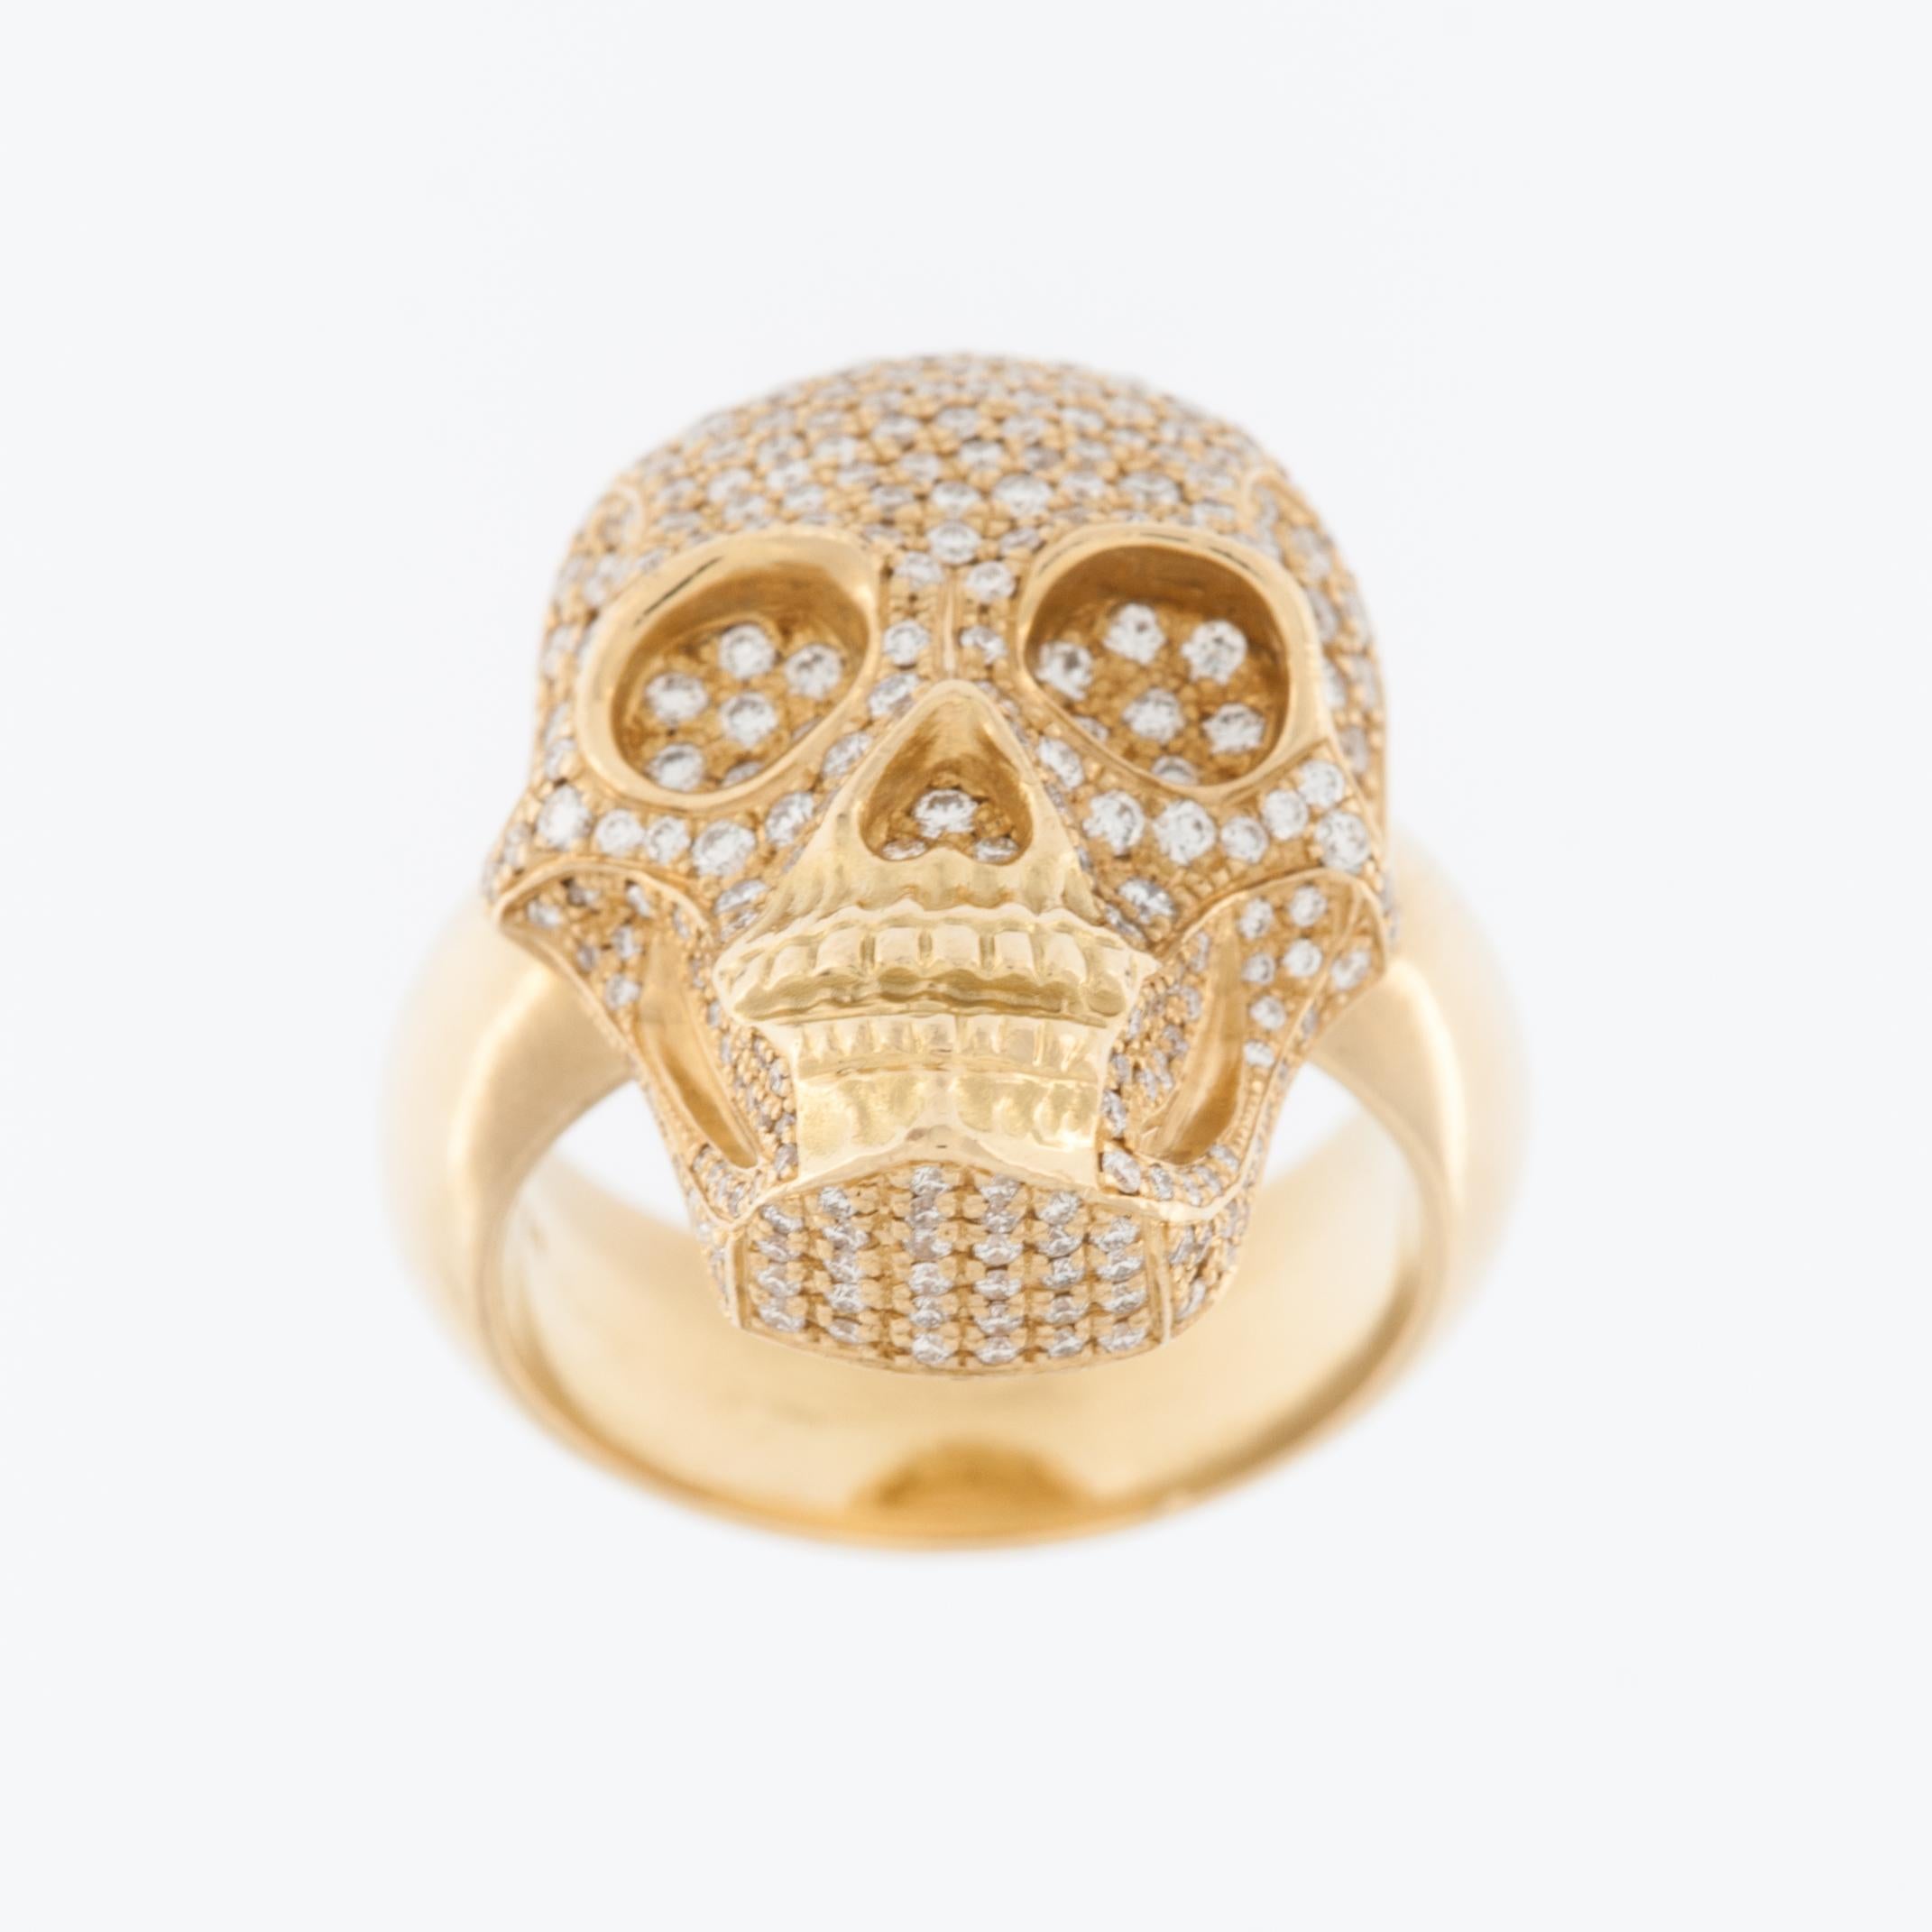 The Skull Design 18kt Yellow Gold Ring with Diamonds is a striking and unique piece of jewelry that combines luxury with edgy aesthetics. The ring is crafted from high-quality 18-karat yellow gold, ensuring durability and a rich, warm color.

The